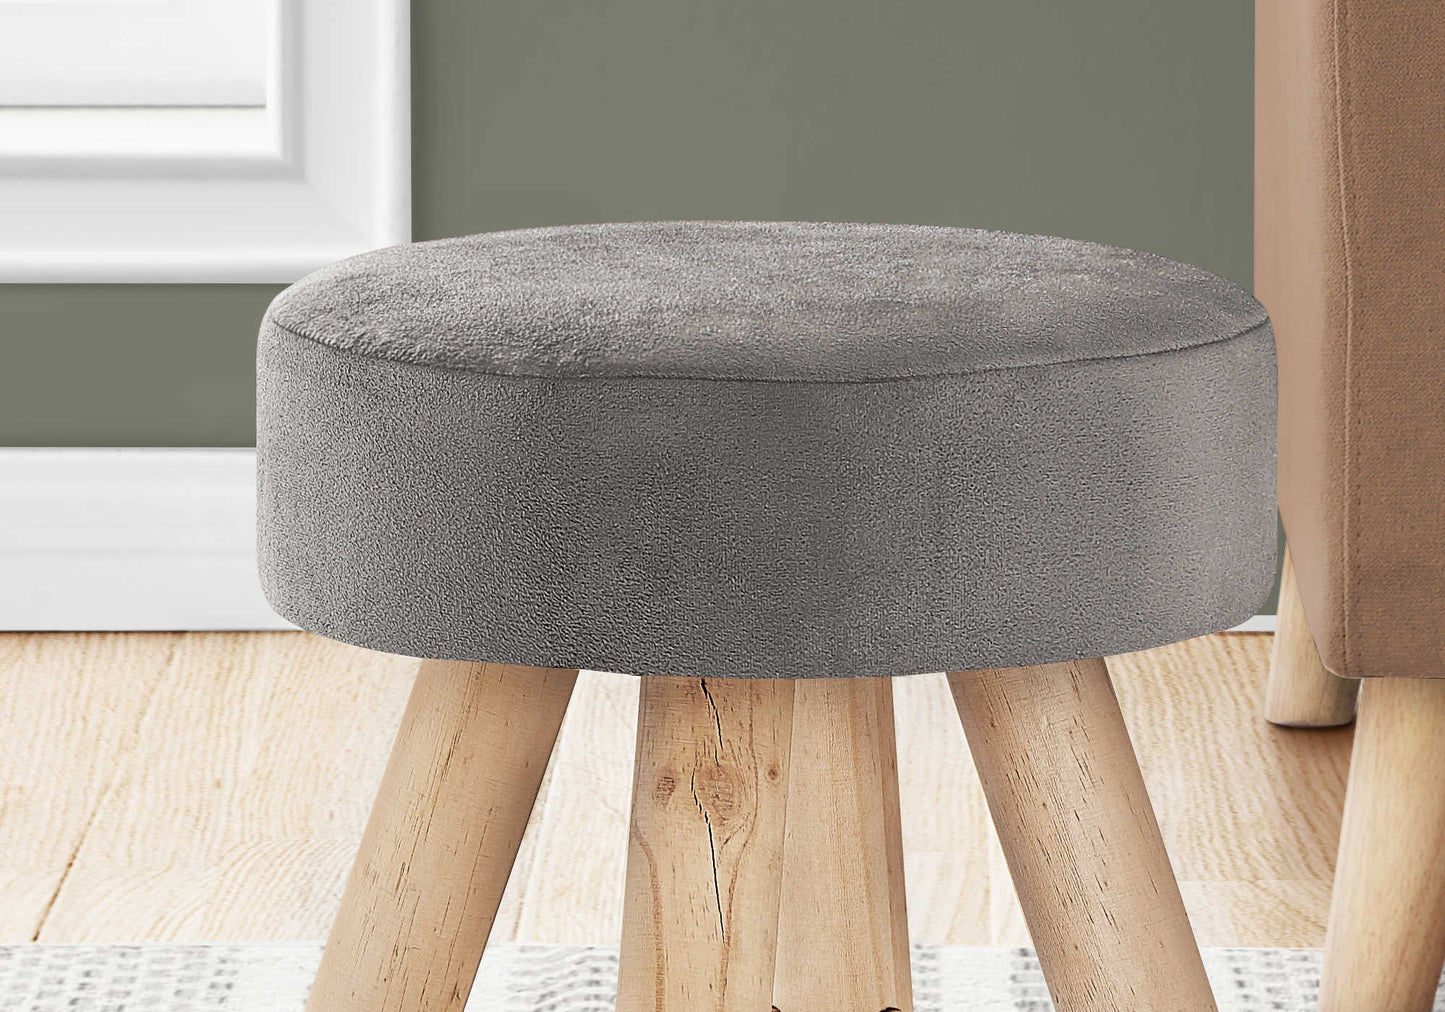 12" Round Velvet Bedroom Ottoman with Solid Natural Wood Legs